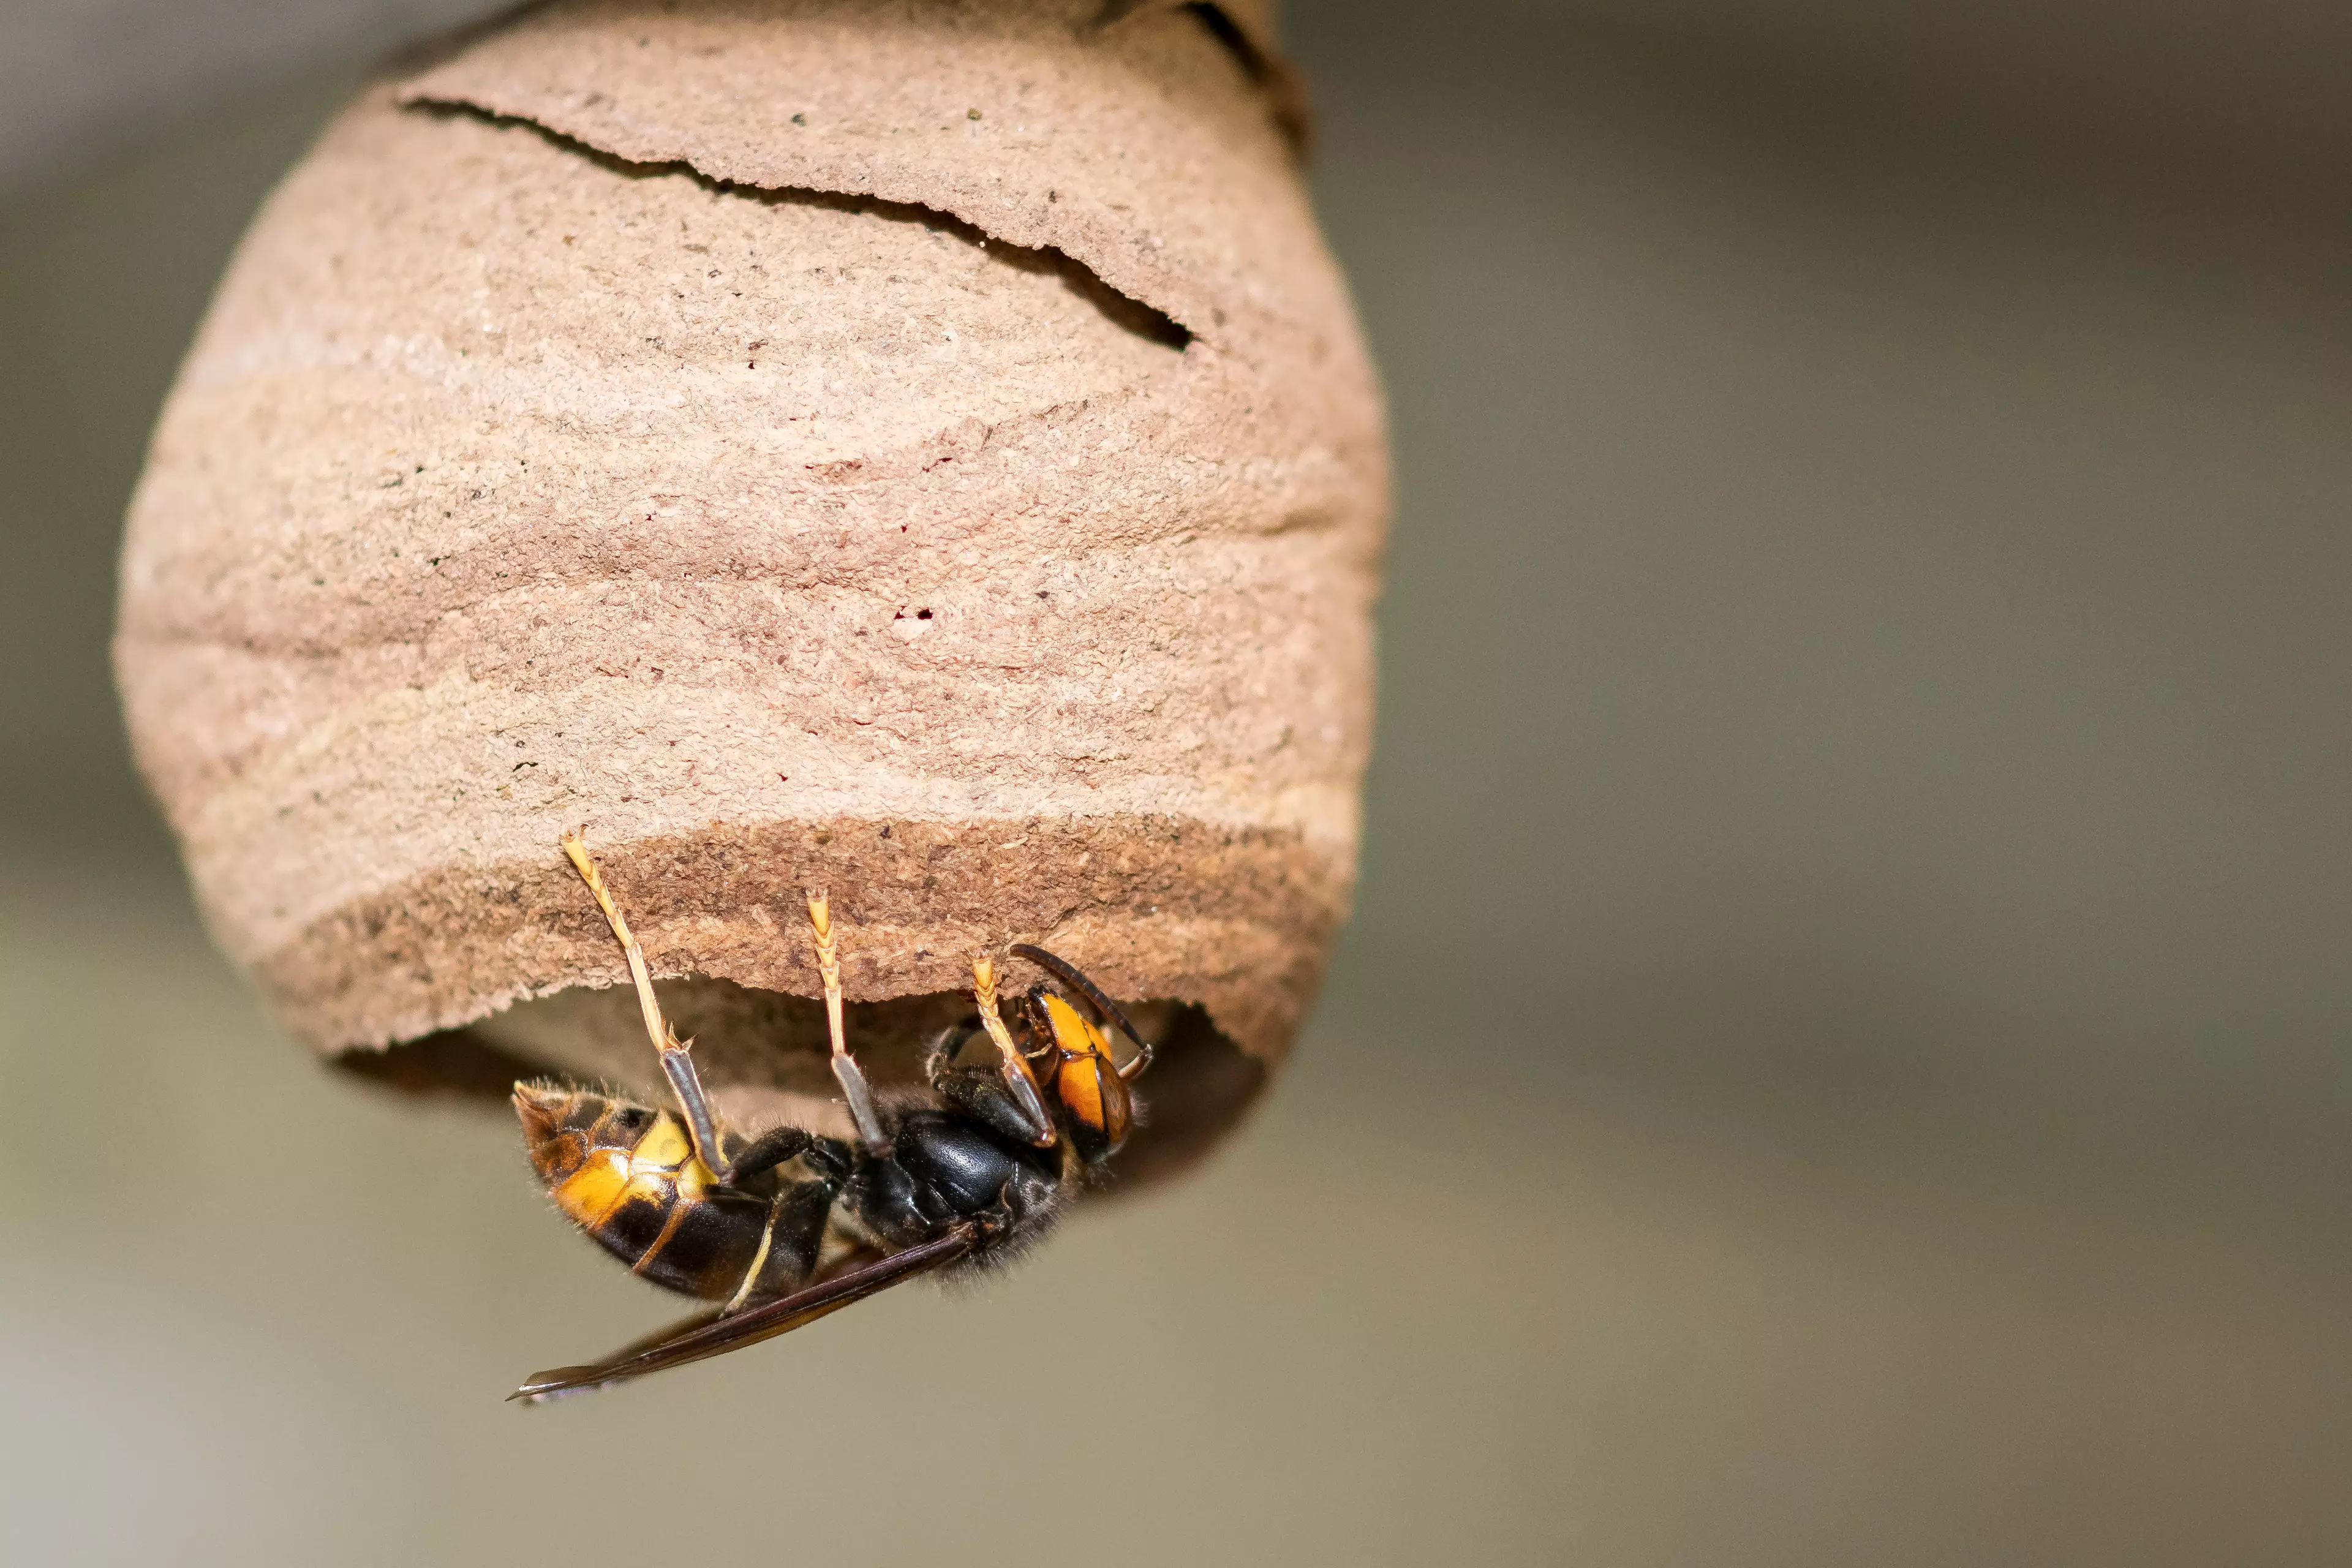 Jersey residents have been asked to report any sightings of the Asian Hornets (